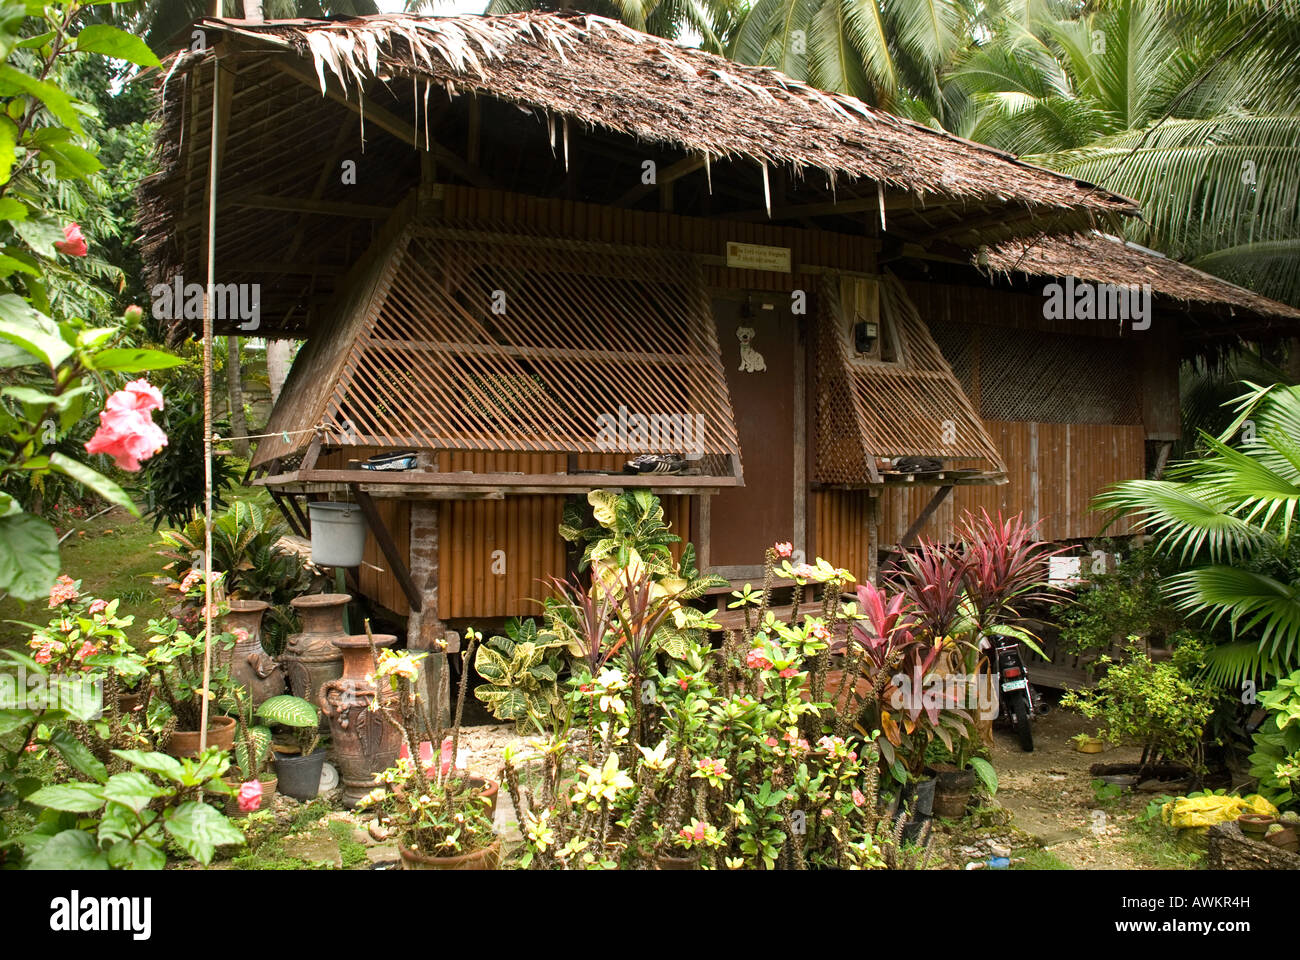 philippines siquijor island larena town old wooden house Stock Photo